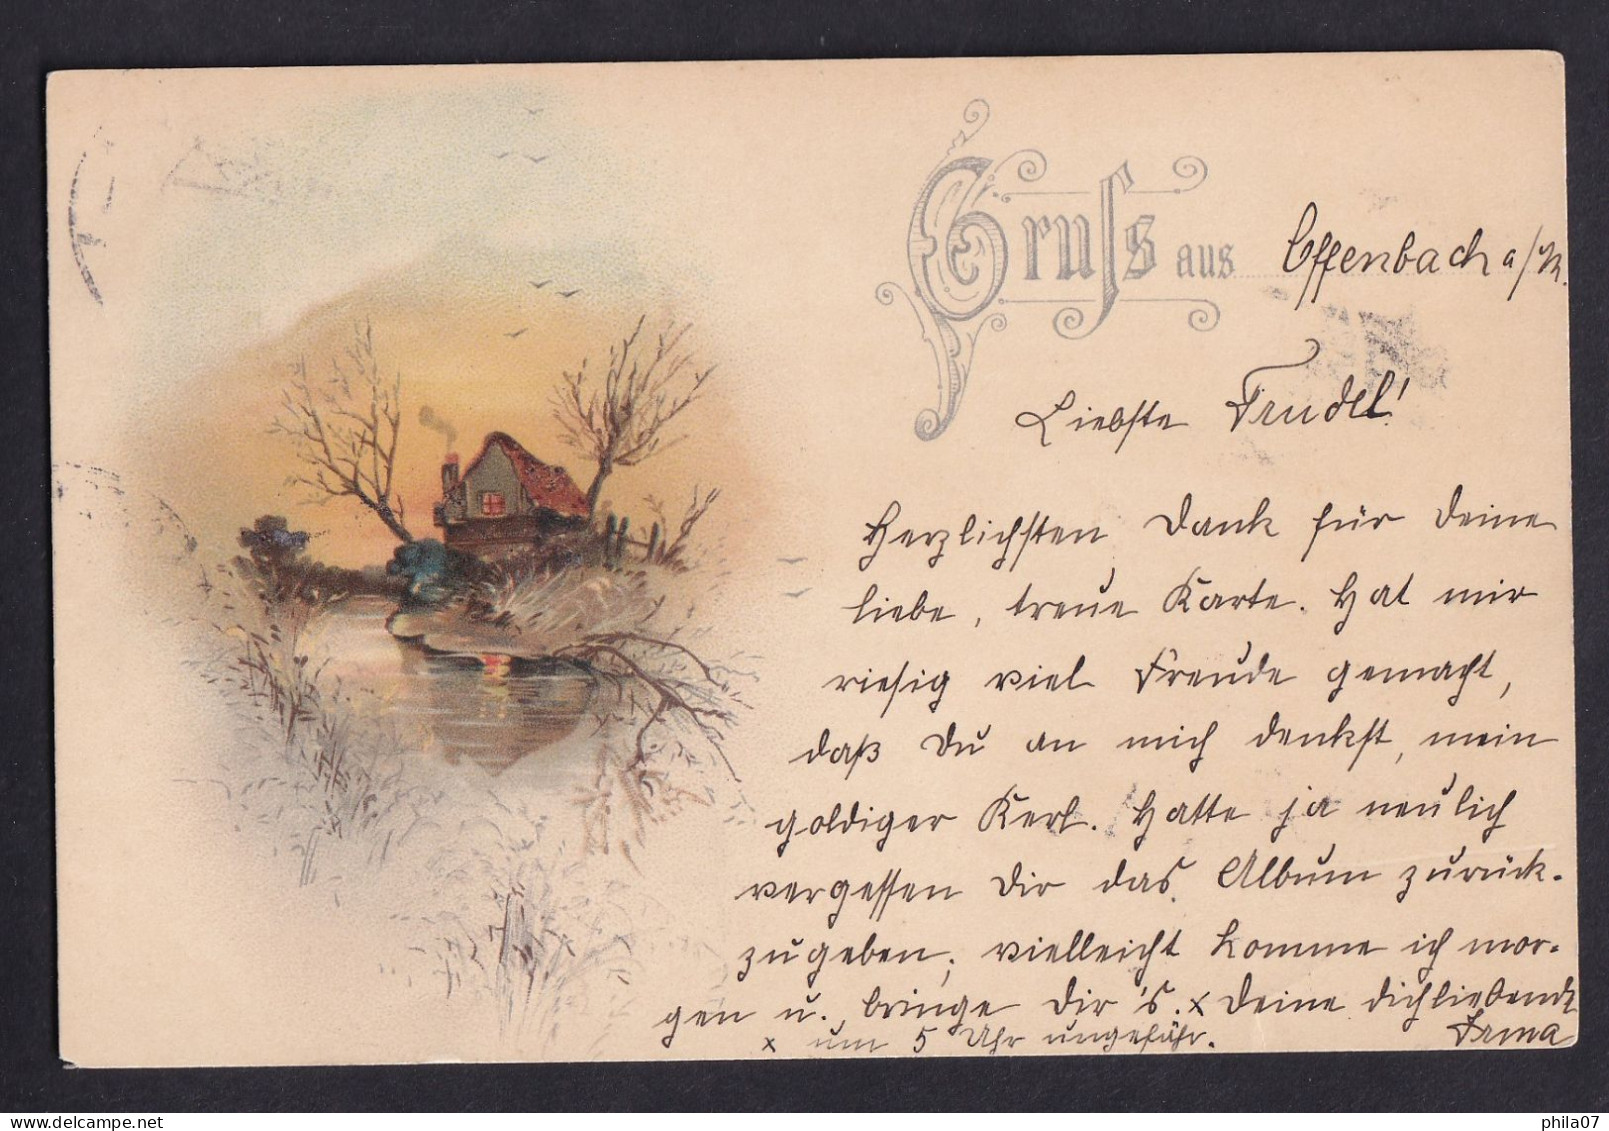 Gruss Aus.... / Year 1899 / Long Line Postcard Circulated, 2 Scans - Greetings From...